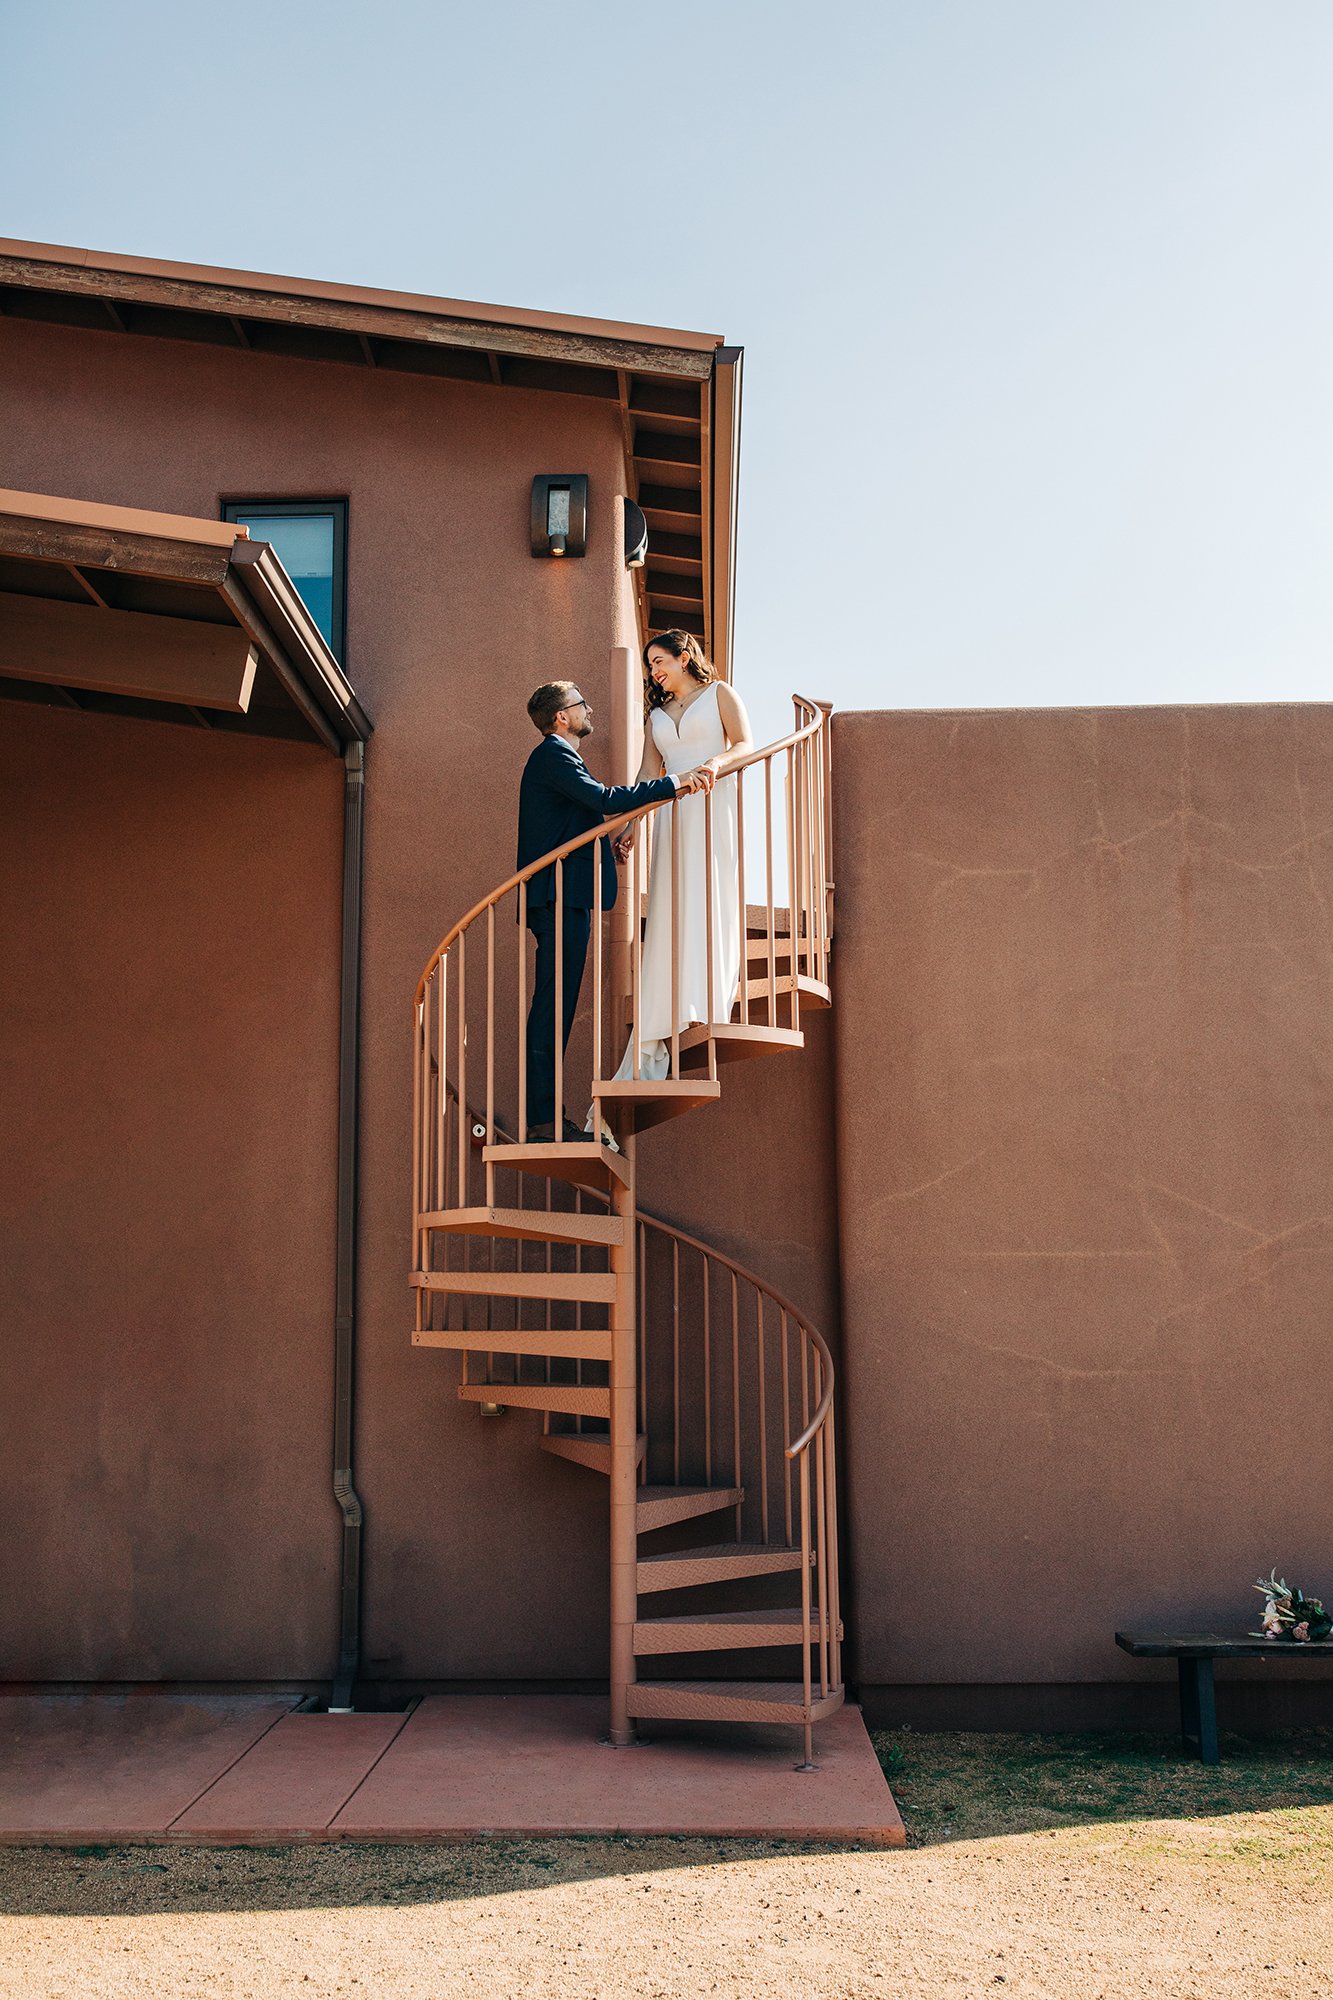 Wedding couple, Stephanie and Matt, pose for a photo on the stairs ahead of their Sedona elopement wedding